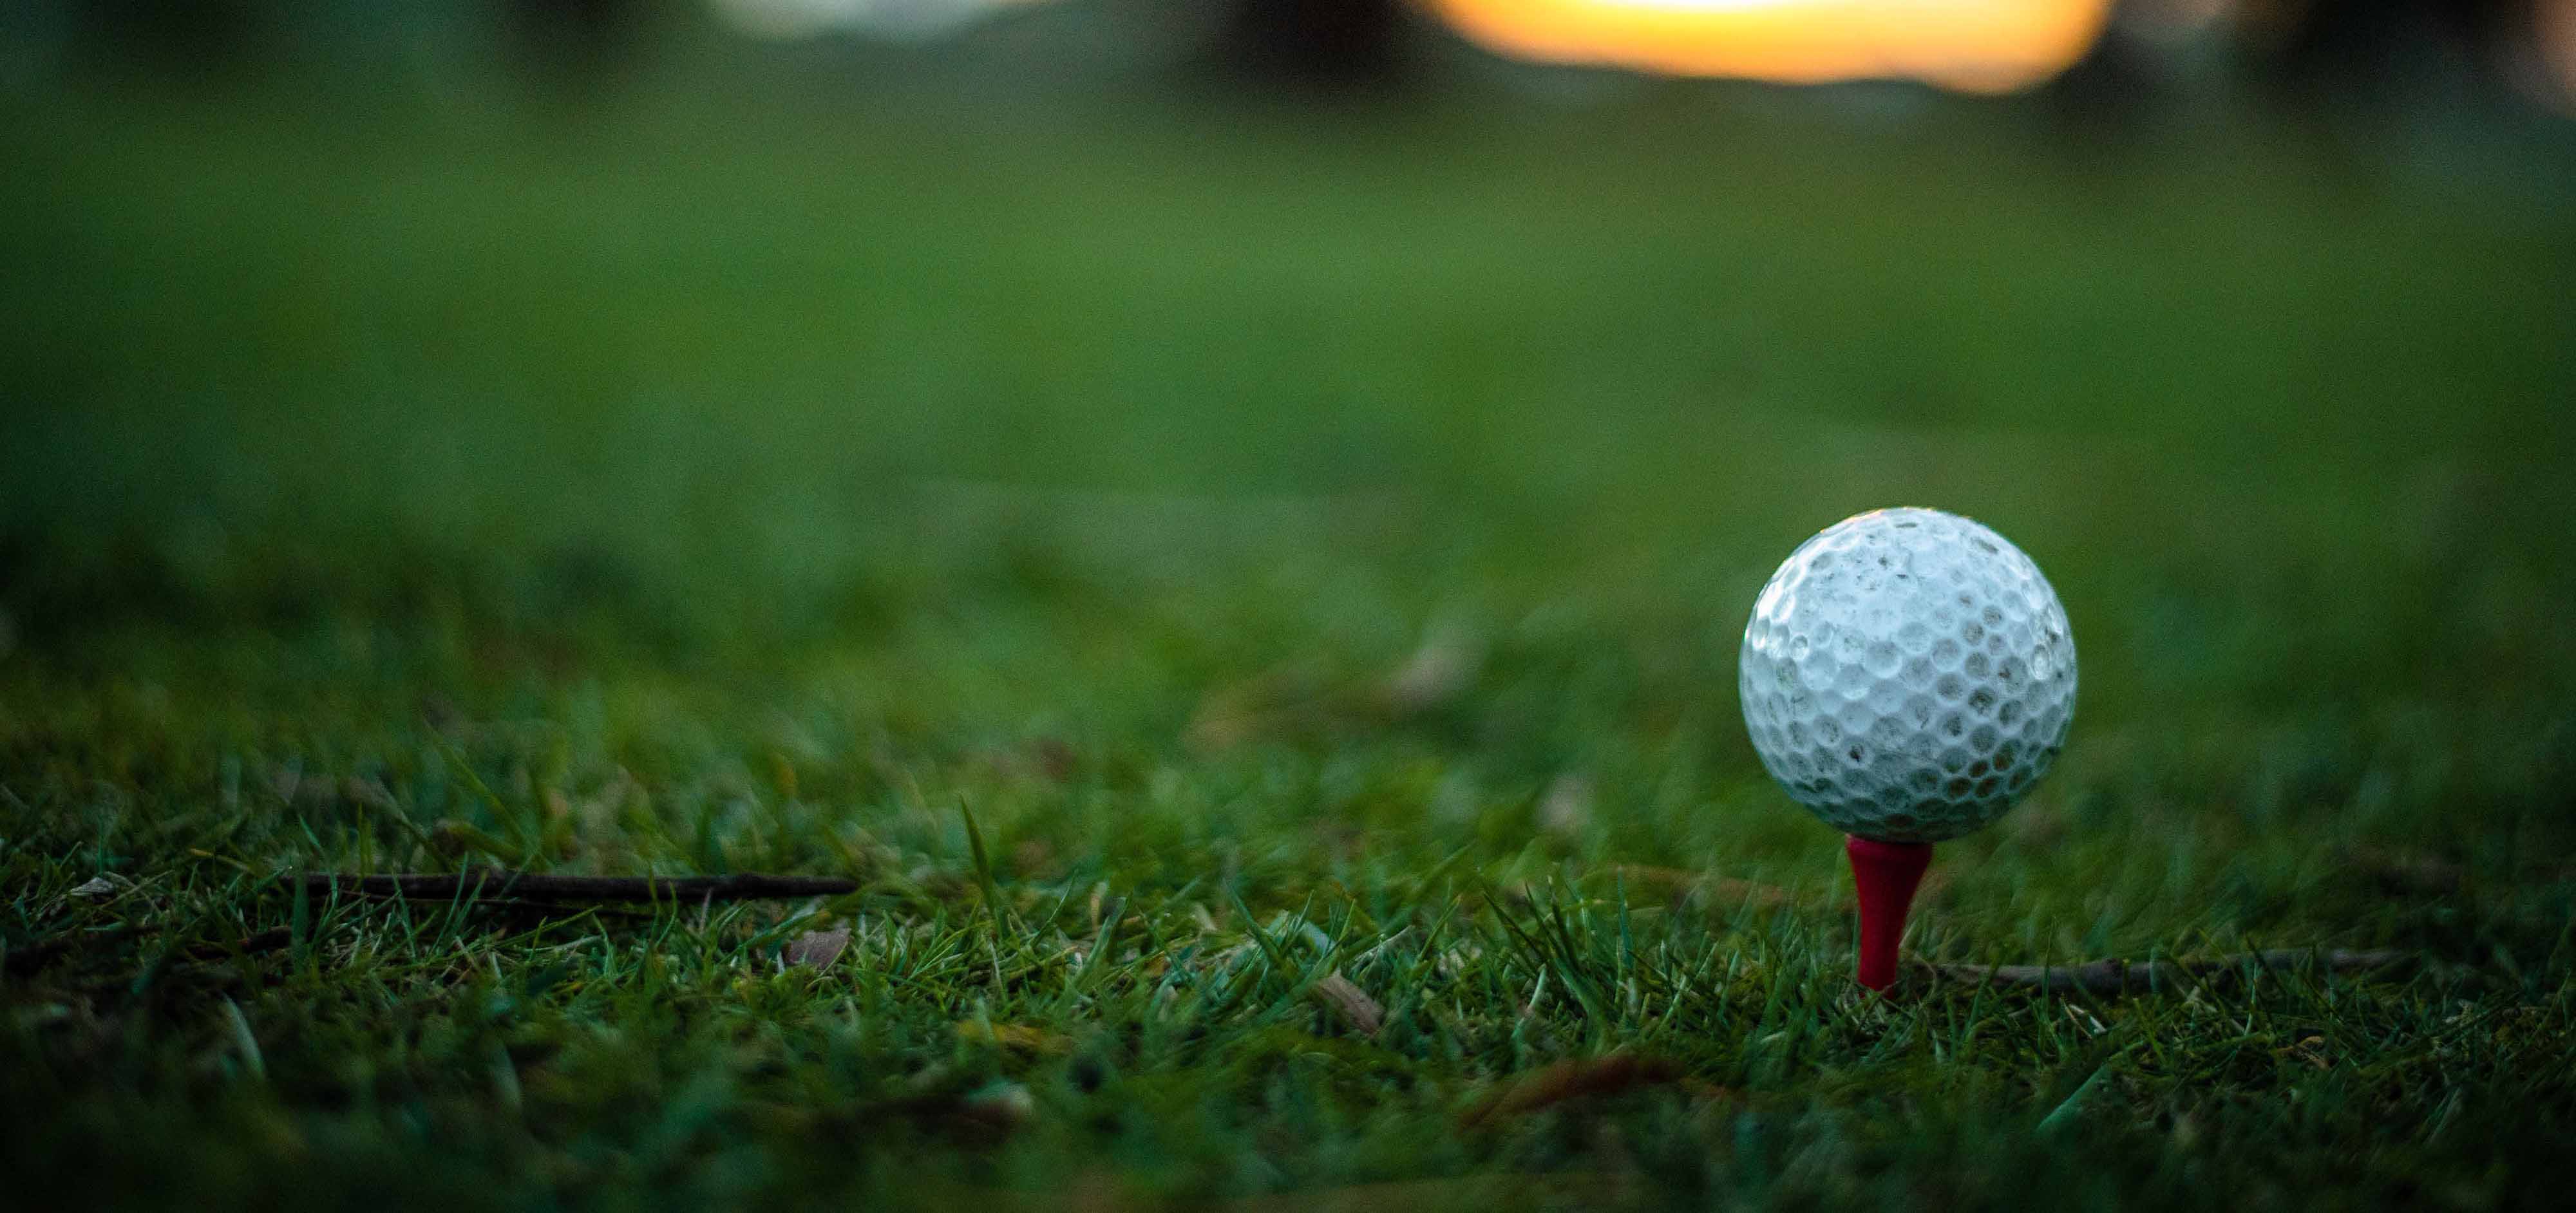 An image of a golf ball sitting on a tee that in placed in the ground on a golf course.